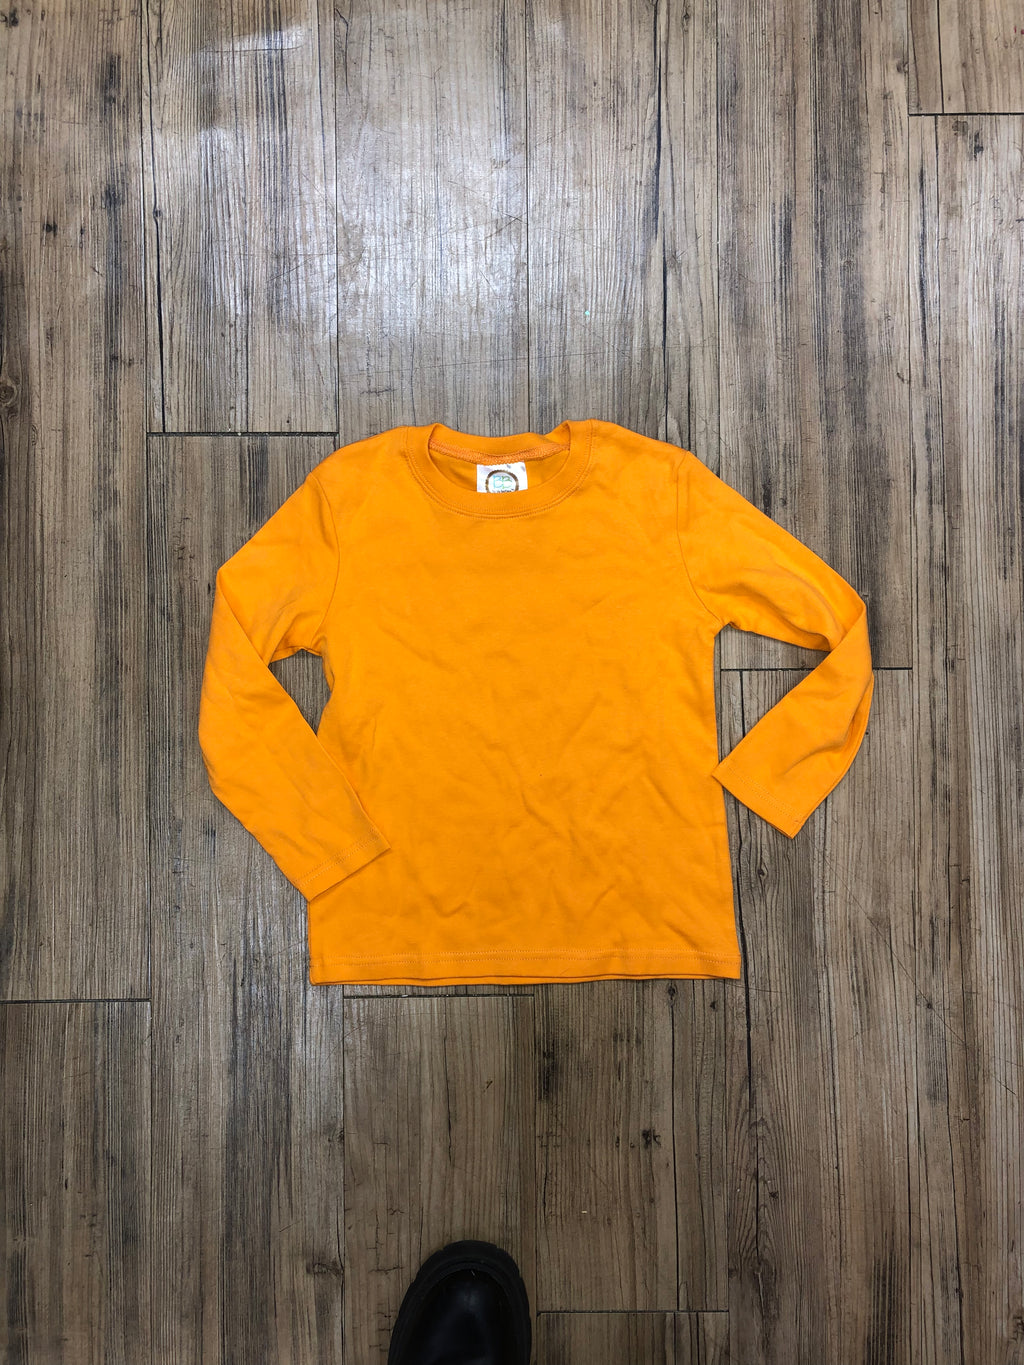 Blanks Boutique Long Sleeve Creamsicle T-shirt